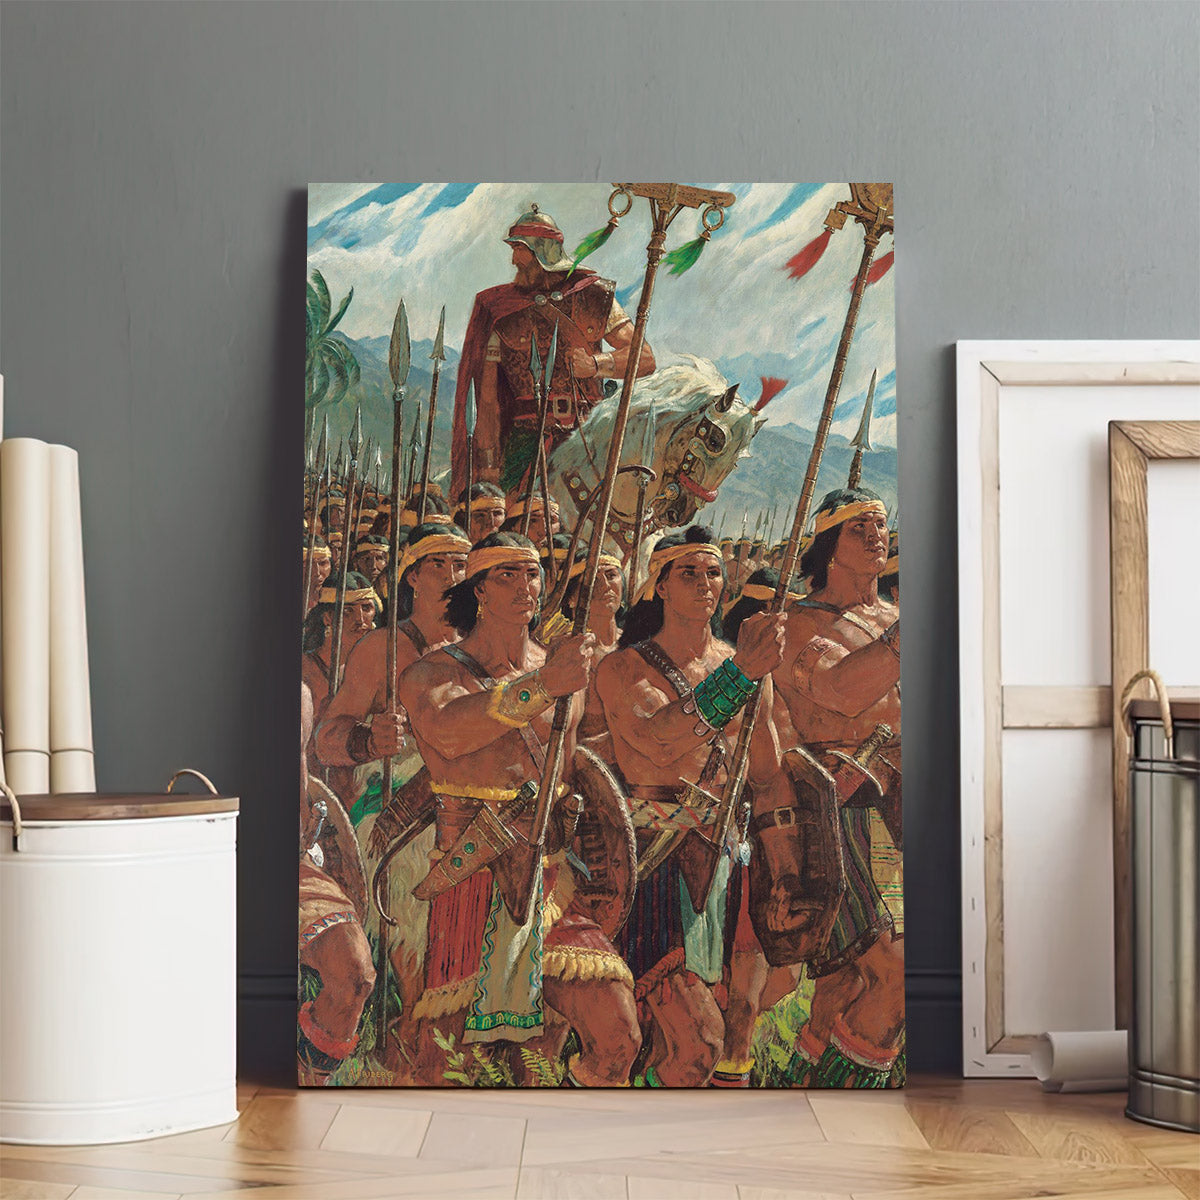 Two Thousand Young Warriors Canvas Pictures - Religious Canvas Wall Art - Scriptures Wall Decor